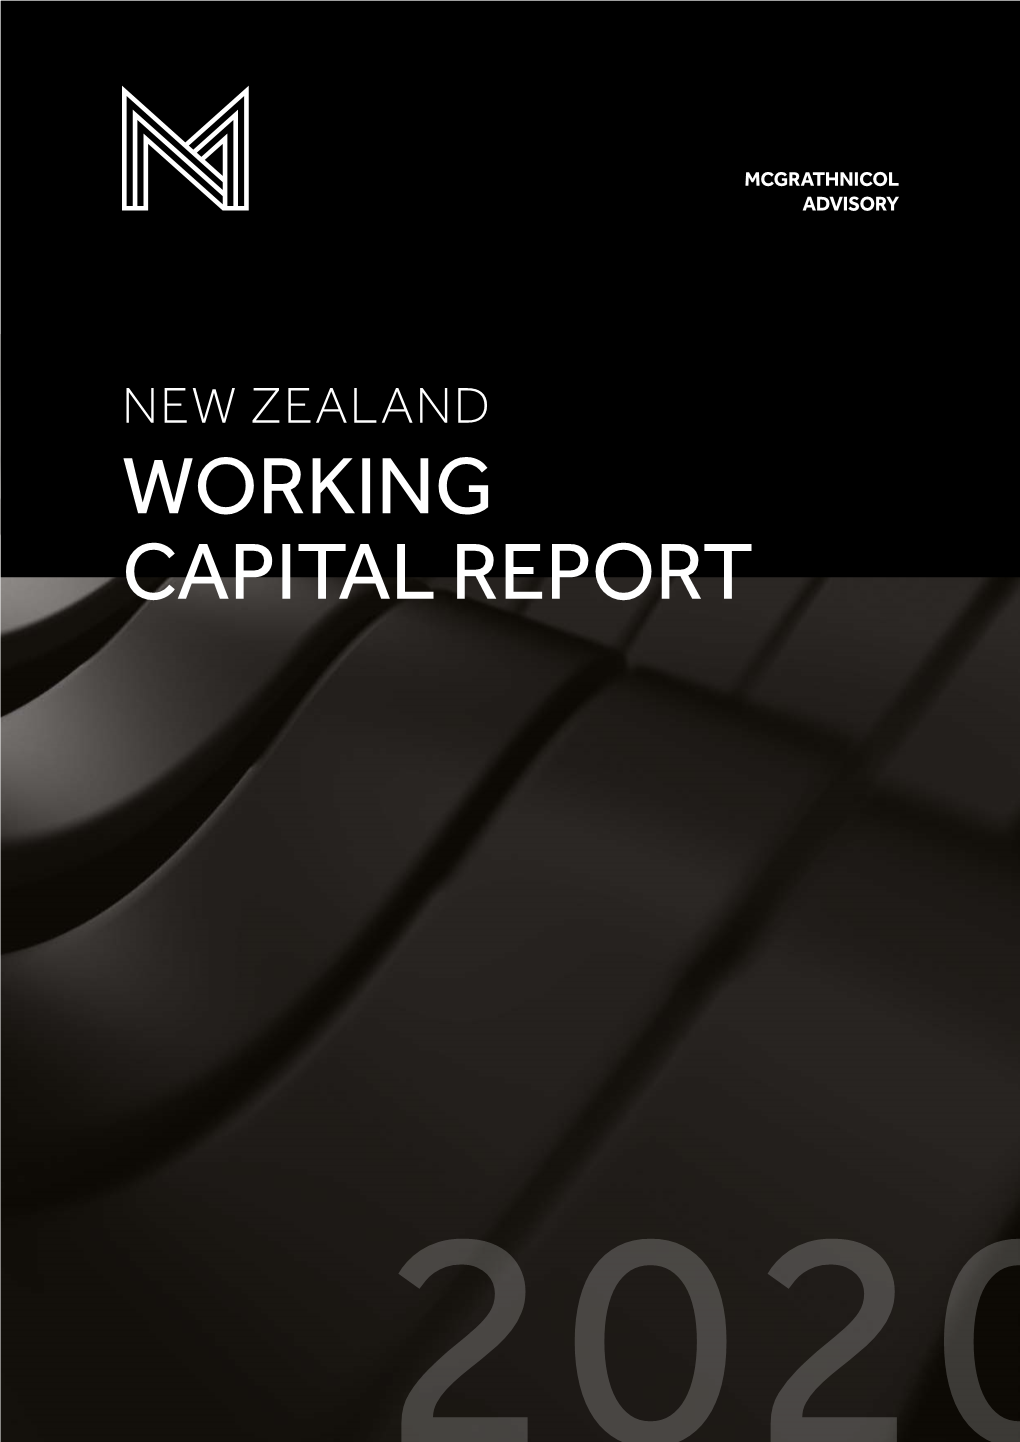 WORKING CAPITAL REPORT Welcome